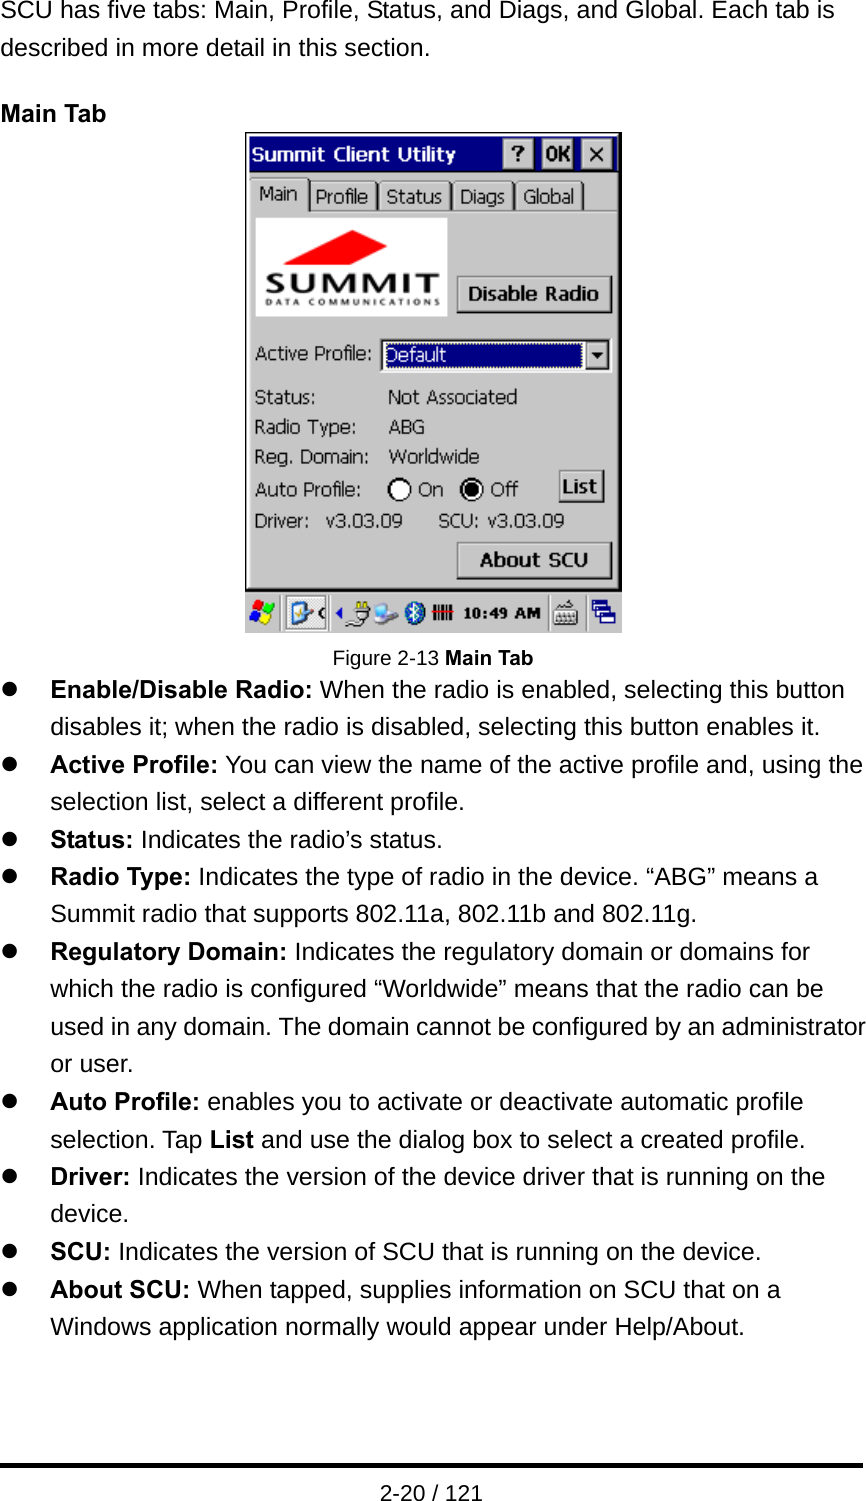  2-20 / 121 SCU has five tabs: Main, Profile, Status, and Diags, and Global. Each tab is described in more detail in this section.  Main Tab  Figure 2-13 Main Tab z Enable/Disable Radio: When the radio is enabled, selecting this button disables it; when the radio is disabled, selecting this button enables it.   z Active Profile: You can view the name of the active profile and, using the selection list, select a different profile. z Status: Indicates the radio’s status. z Radio Type: Indicates the type of radio in the device. “ABG” means a Summit radio that supports 802.11a, 802.11b and 802.11g.   z Regulatory Domain: Indicates the regulatory domain or domains for which the radio is configured “Worldwide” means that the radio can be used in any domain. The domain cannot be configured by an administrator or user. z Auto Profile: enables you to activate or deactivate automatic profile selection. Tap List and use the dialog box to select a created profile. z Driver: Indicates the version of the device driver that is running on the device. z SCU: Indicates the version of SCU that is running on the device. z About SCU: When tapped, supplies information on SCU that on a Windows application normally would appear under Help/About.   